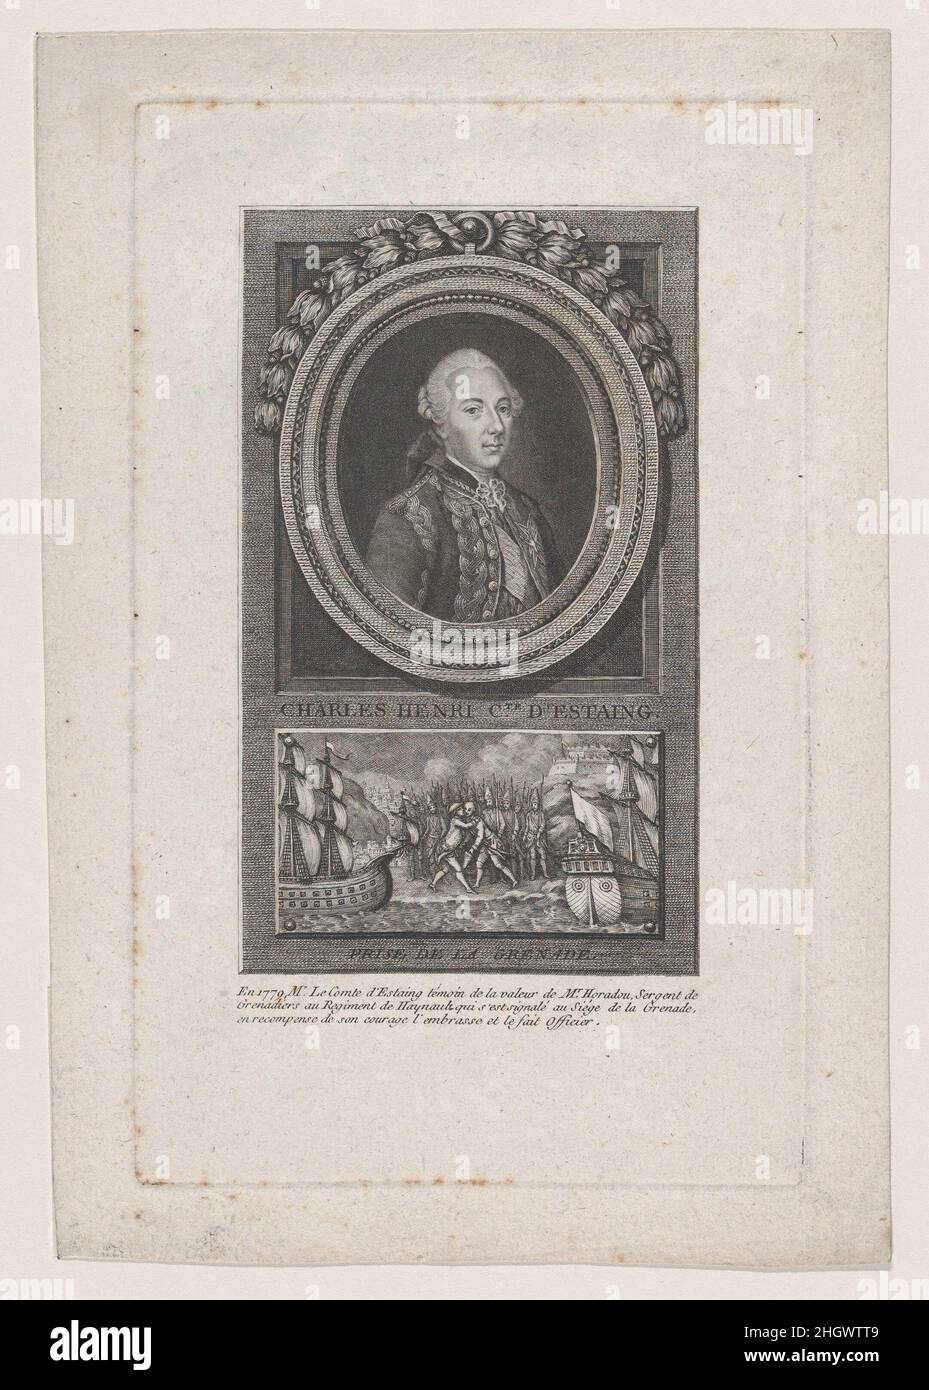 Portrait of Charles Henri, Comte D'Estaing 1779 Jacques Barbié. Portrait of Charles Henri, Comte D'Estaing. Jacques Barbié (French, Paris 1735–1779 Paris). 1779. Etching and engraving; second state. Prints Stock Photo